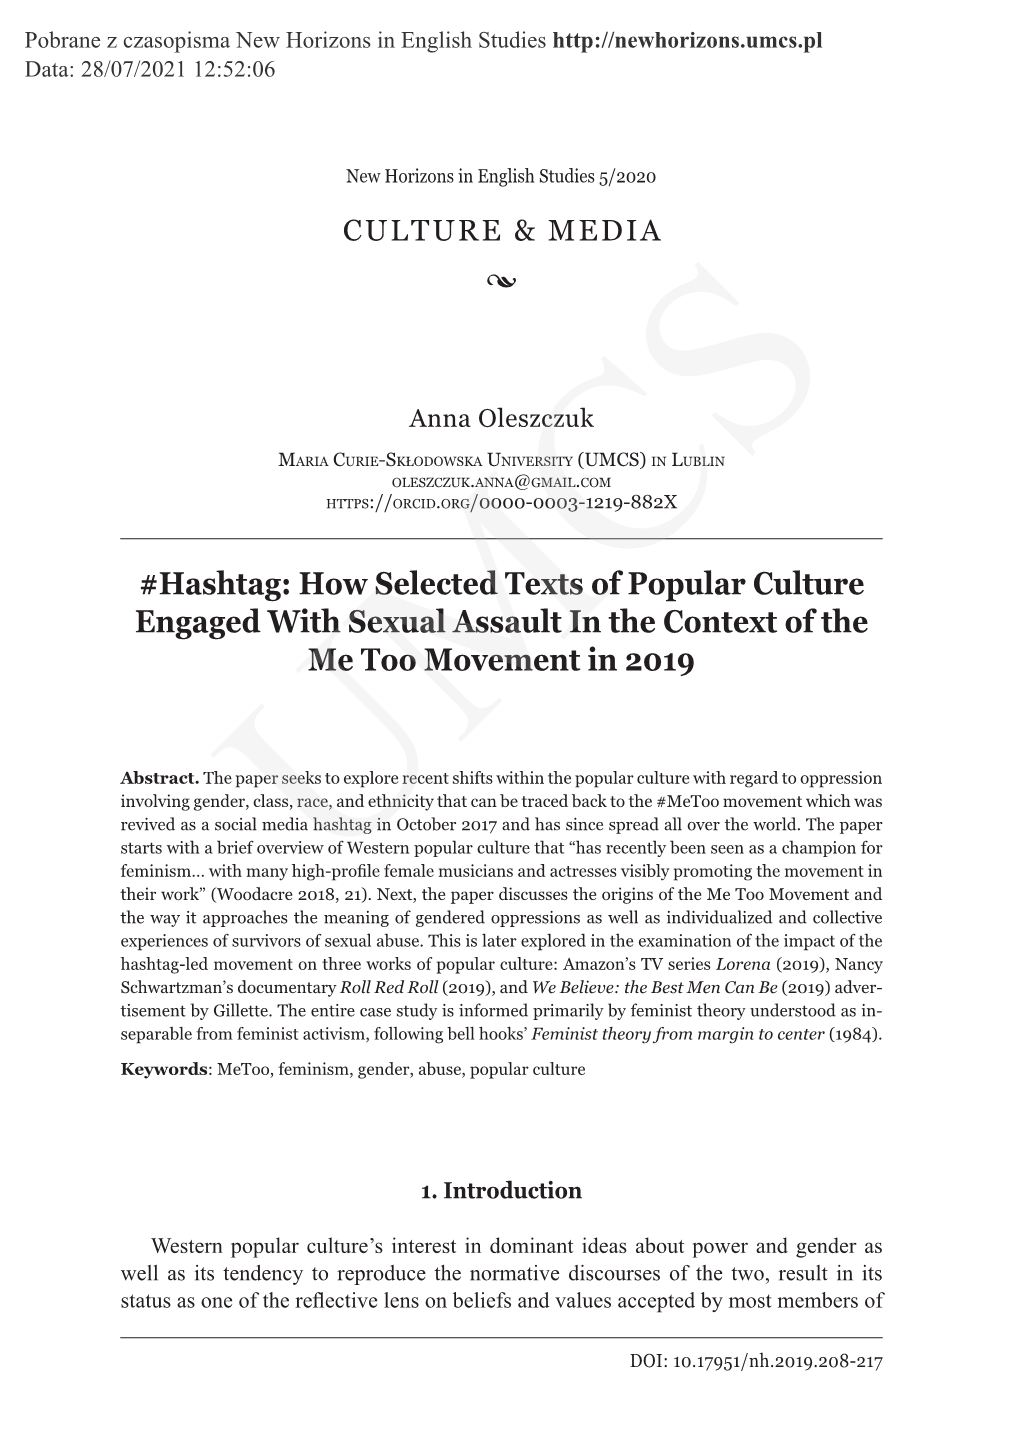 Hashtag: How Selected Texts of Popular Culture Engaged with Sexual Assault in the Context of the Me Too Movement in 2019